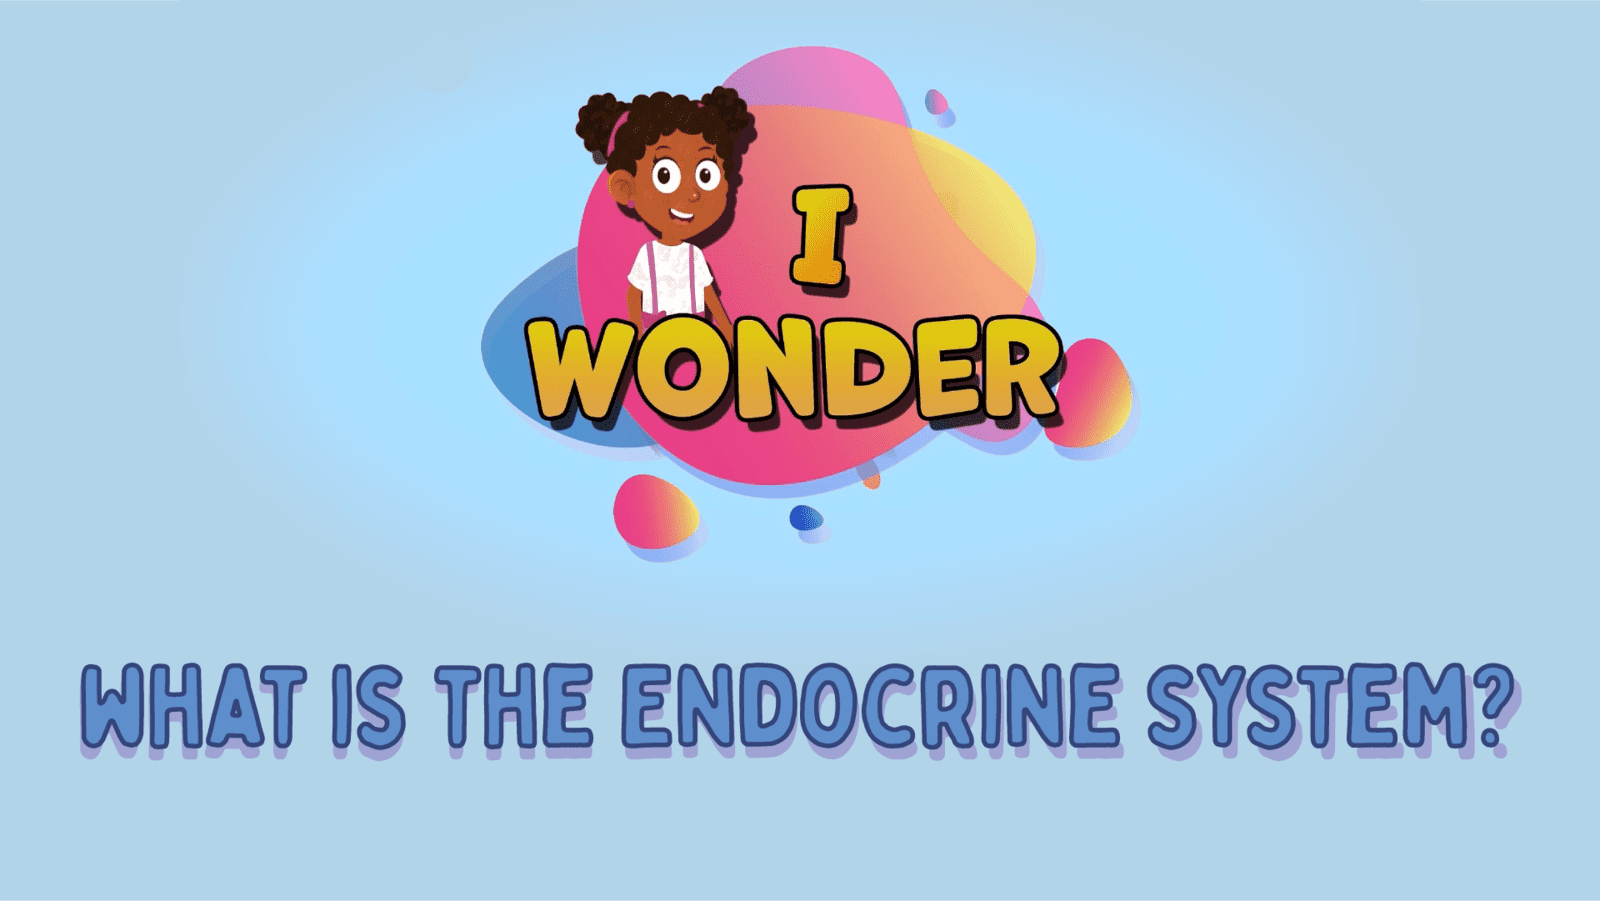 What Is The Endocrine System?